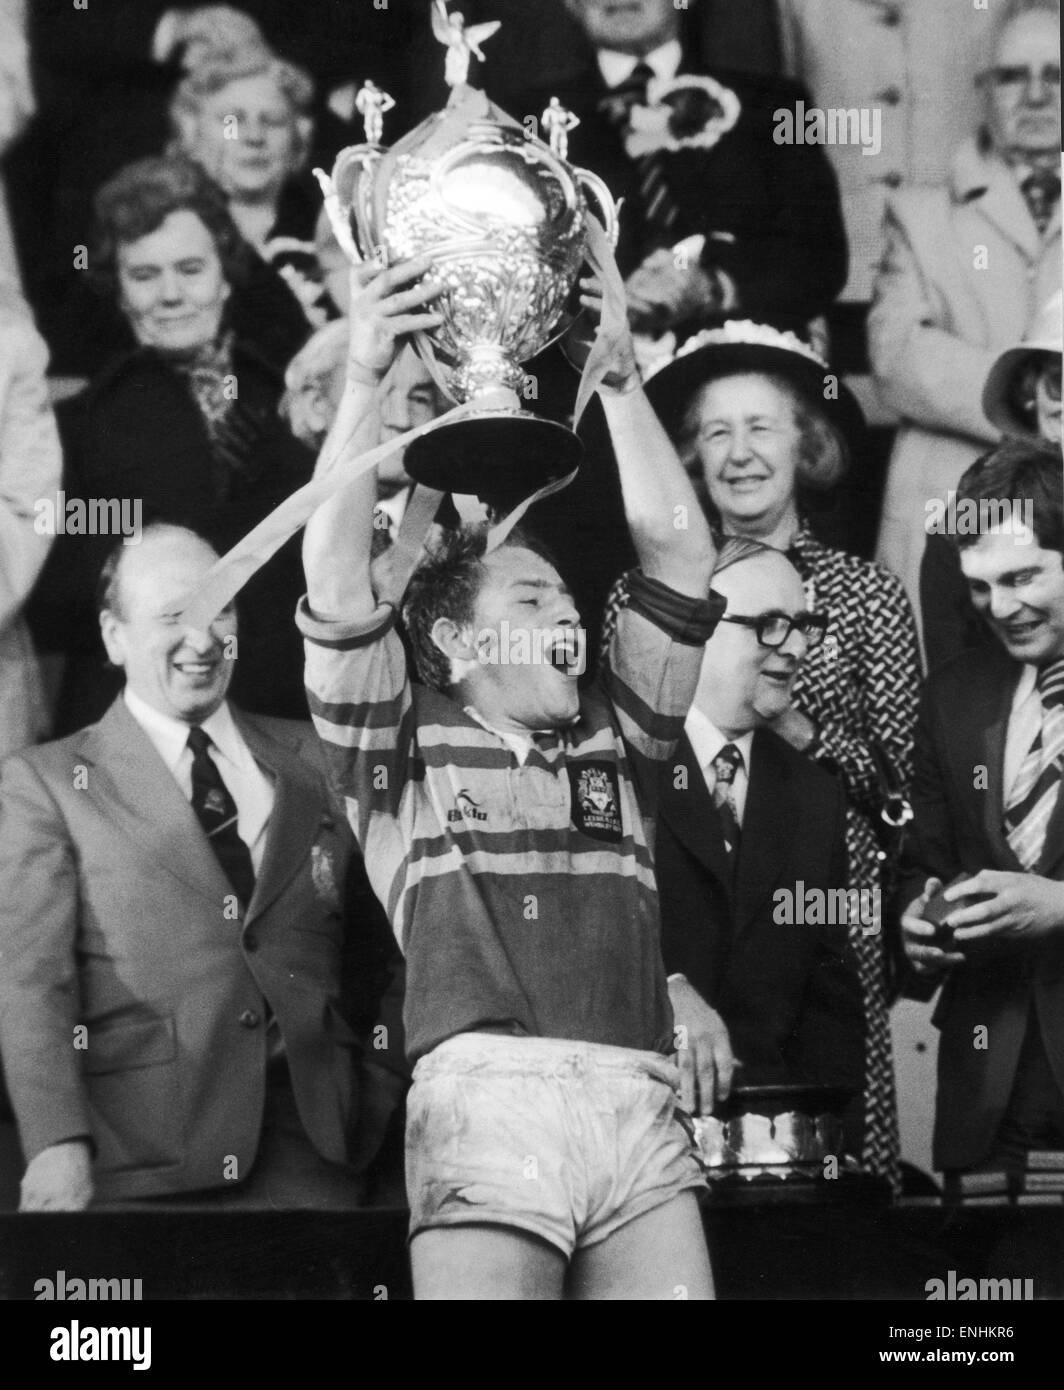 David Ward the Leeds captain holds the trophy aloft to the wating fans after the presentation, following Leeds 16 - 7 victory over Widnes in the Rugby League Cup Final. 7th May 1977 Stock Photo